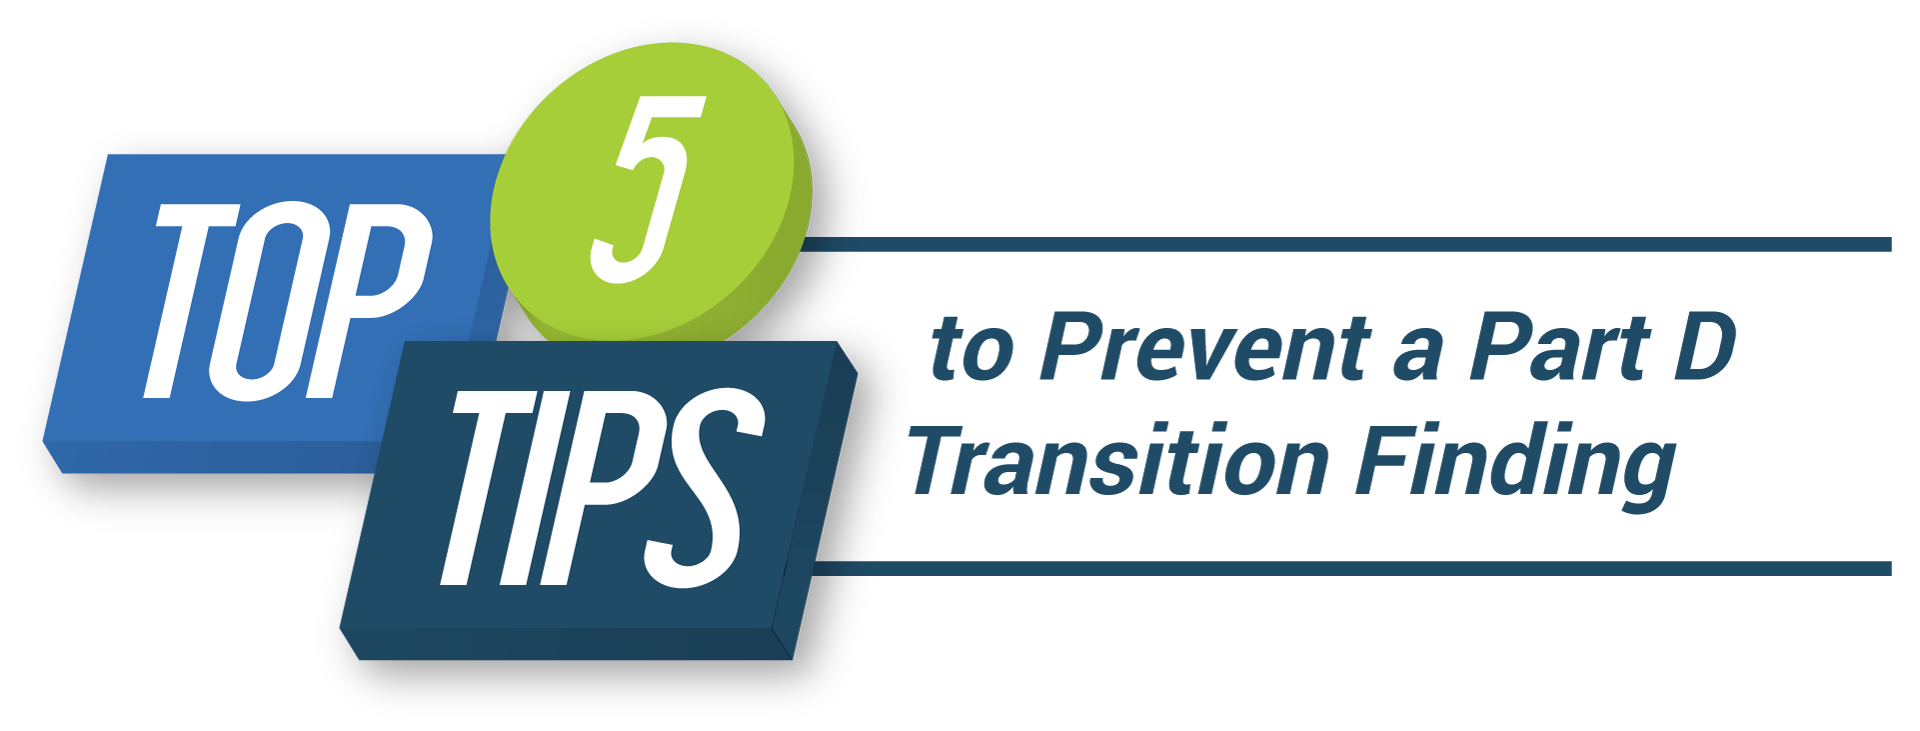 Top 5 Tips to prevent a Part D transition finding